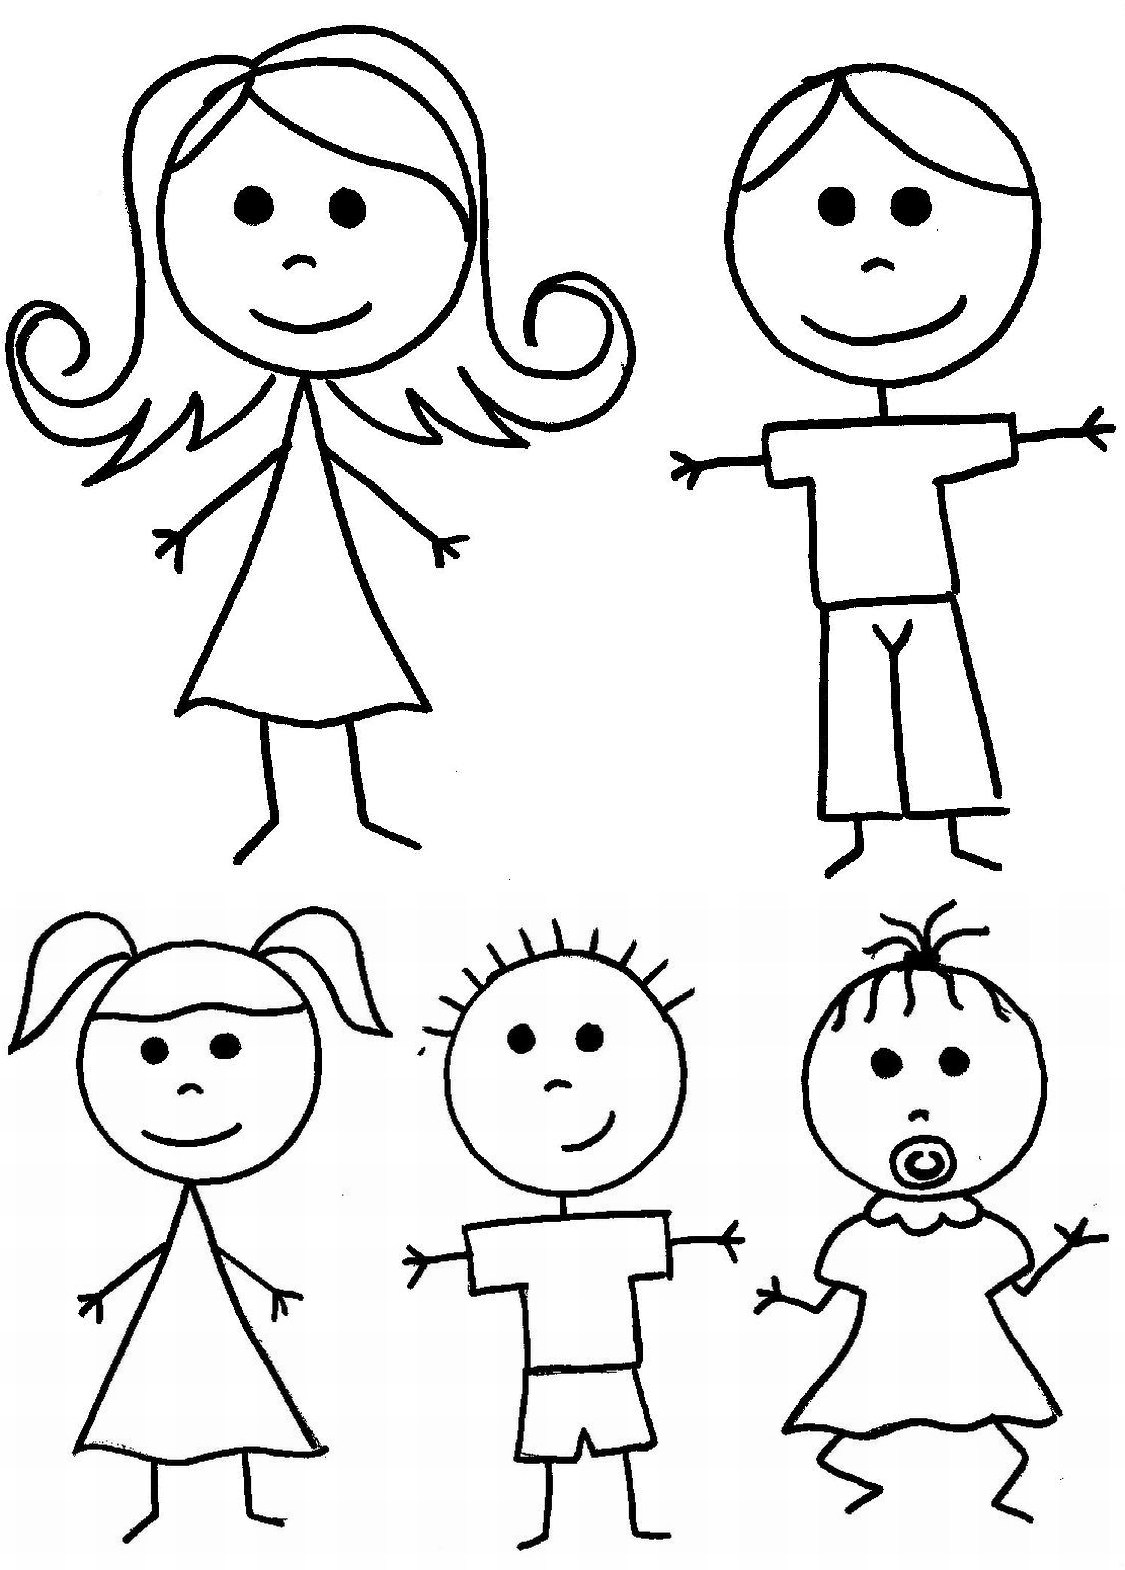 Stick People Coloring Pages at Free printable